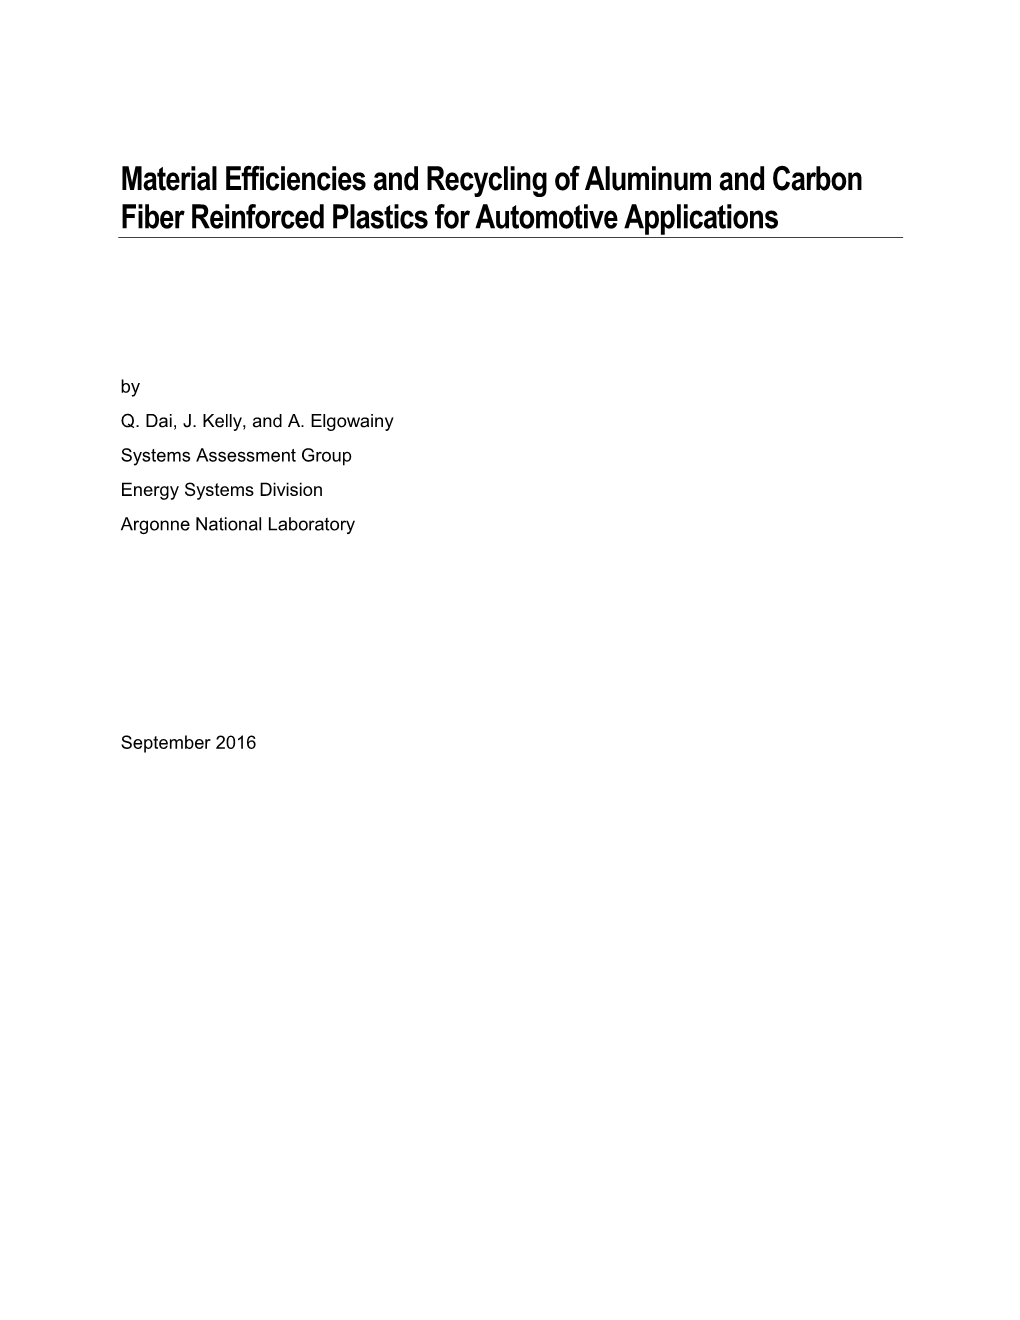 Material Efficiencies and Recycling of Aluminum and Carbon Fiber Reinforced Plastics for Automotive Applications